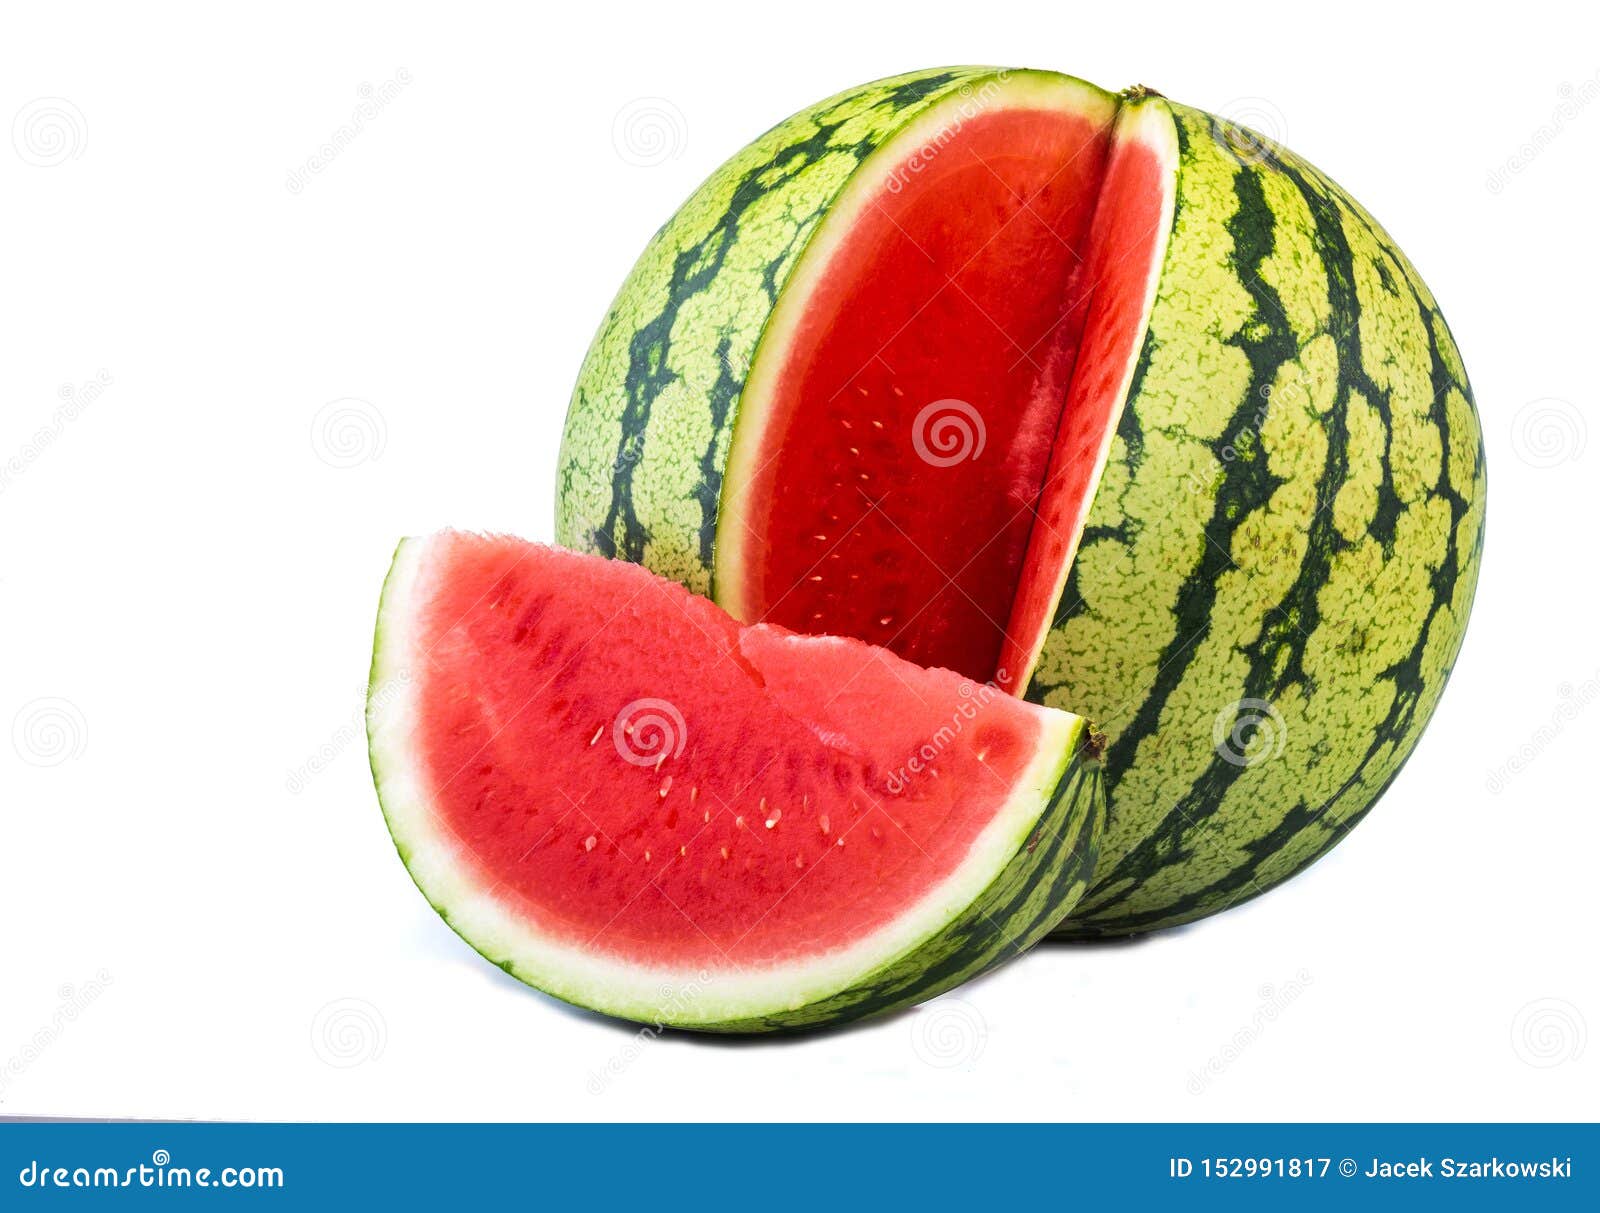 Watermelon on a white background. Juicy watermelon. Watermelon slice. Red fruit. Isolated with background. Perfect in the diet.